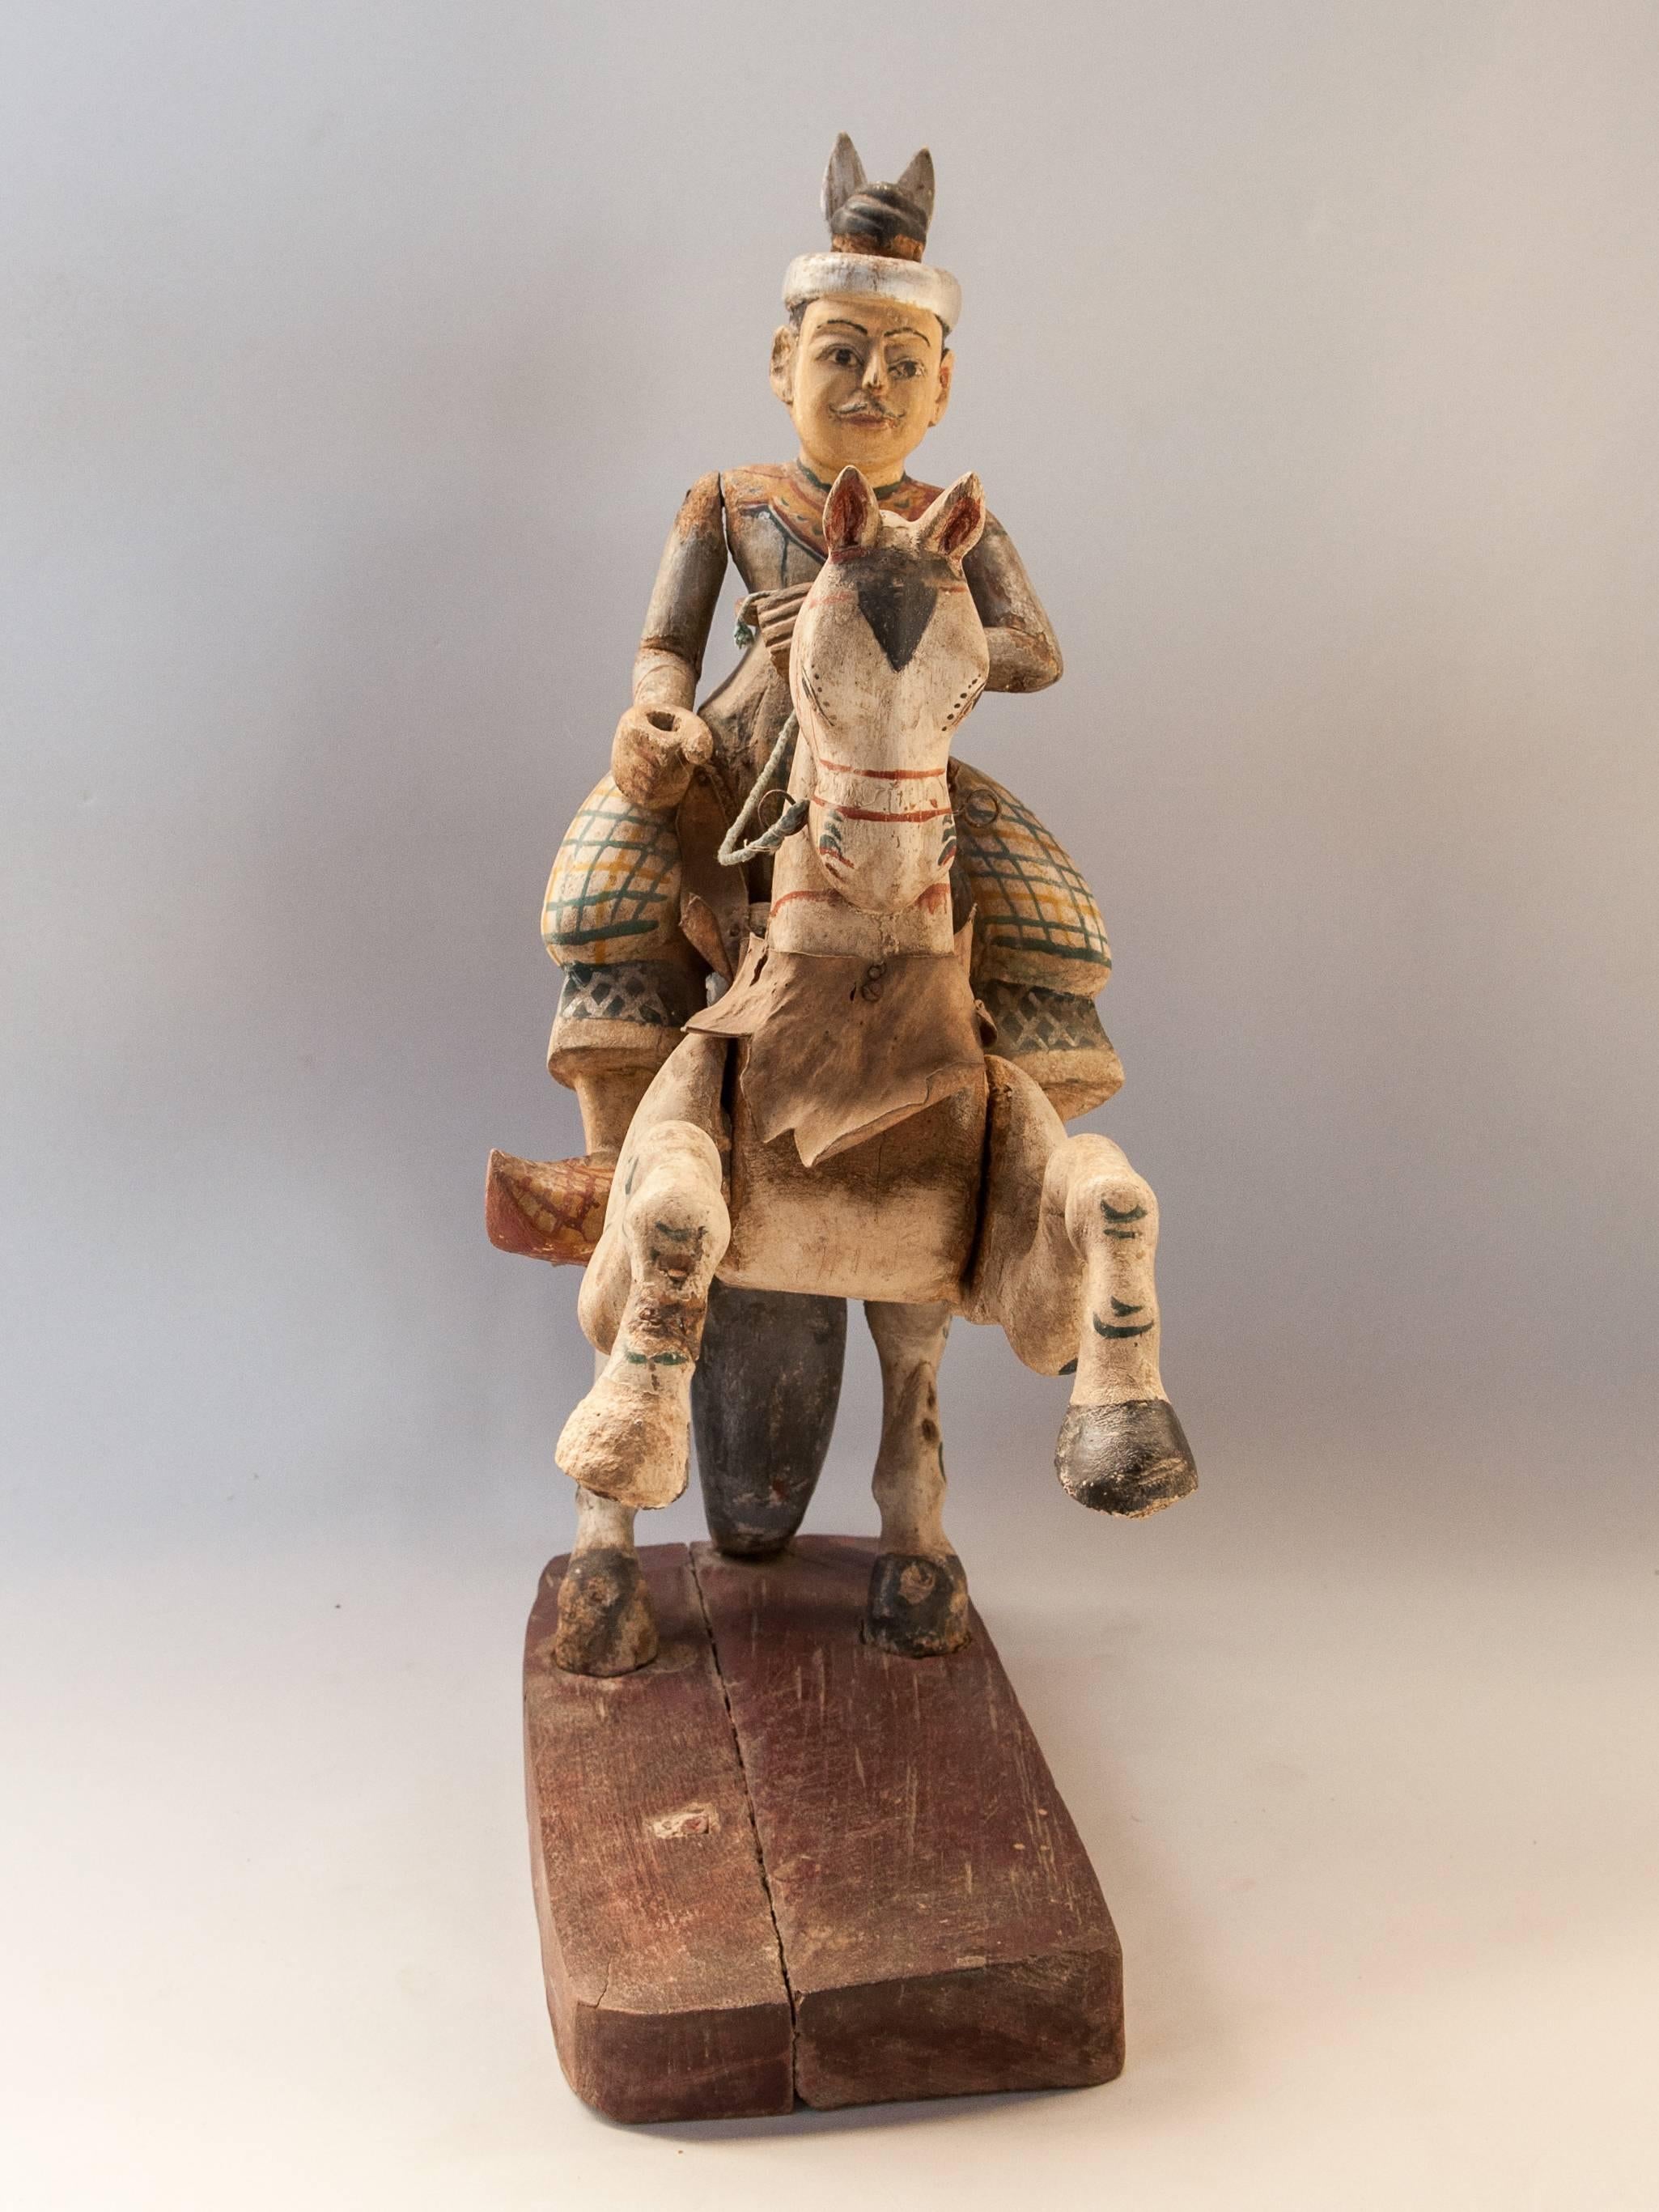 Wood Nat spirit figure min Kyawzwa Burma early to mid-20th century.
Min Kyawzwa is one of the more colorful figures in the pantheon of 37 Great Nats (spirits) officially recognized in the Burmese Buddhist tradition. Depicted as a good horseman, a